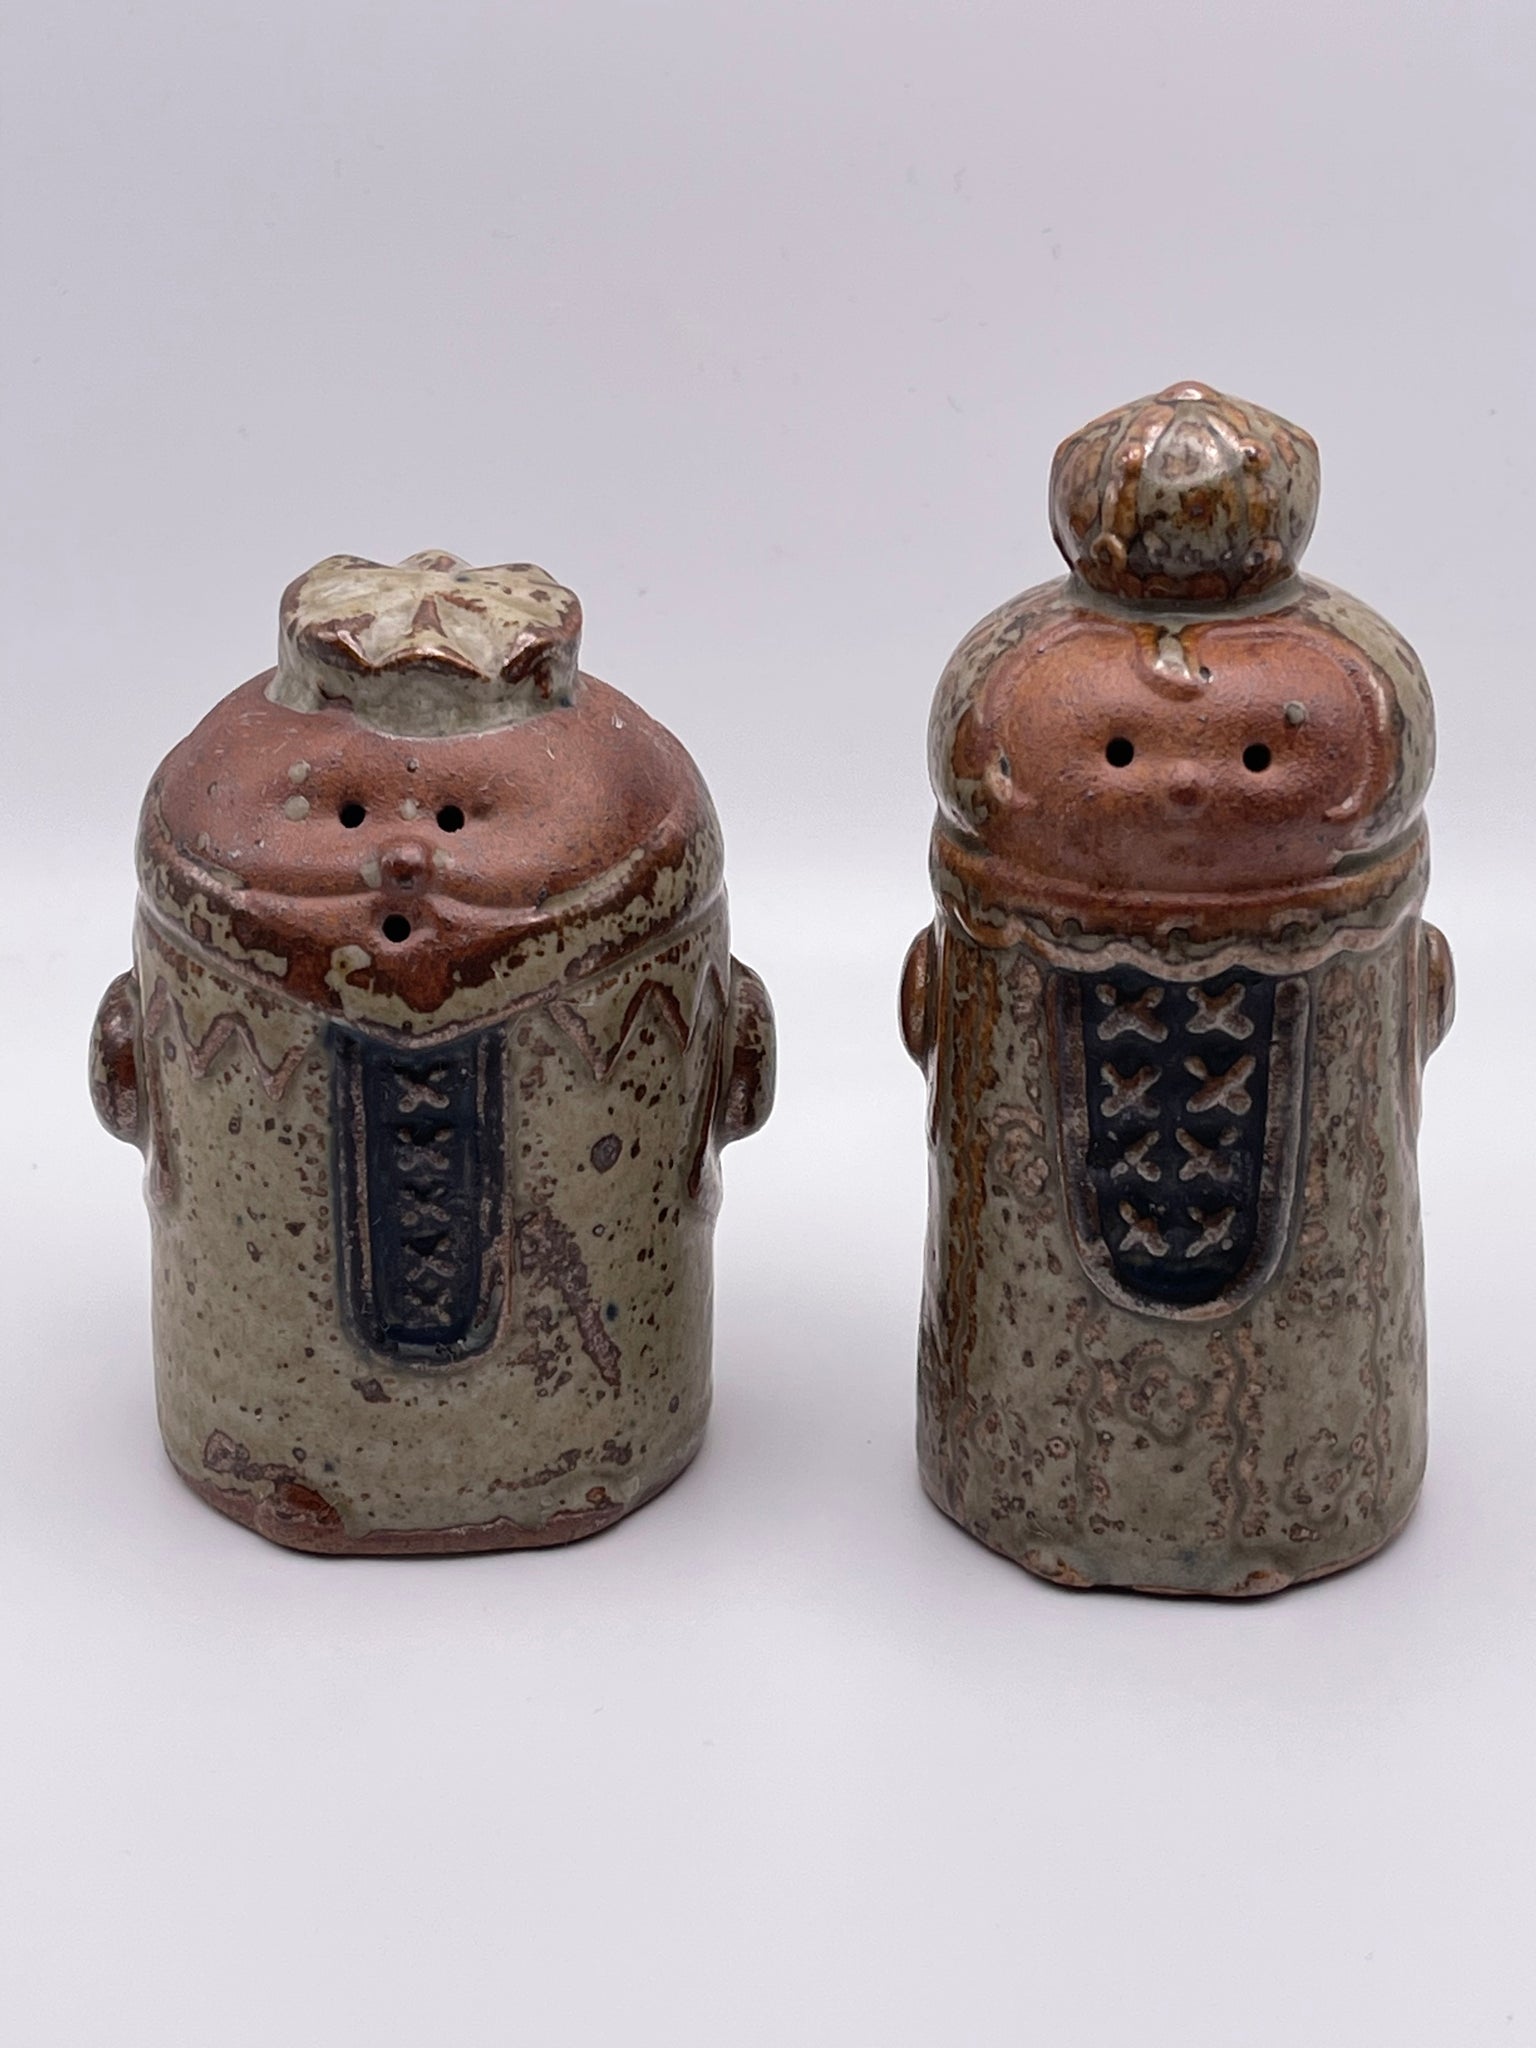 Vintage Alfred E. Knobler Japan, King and Queen Ceramic Salt and Pepper Shakers